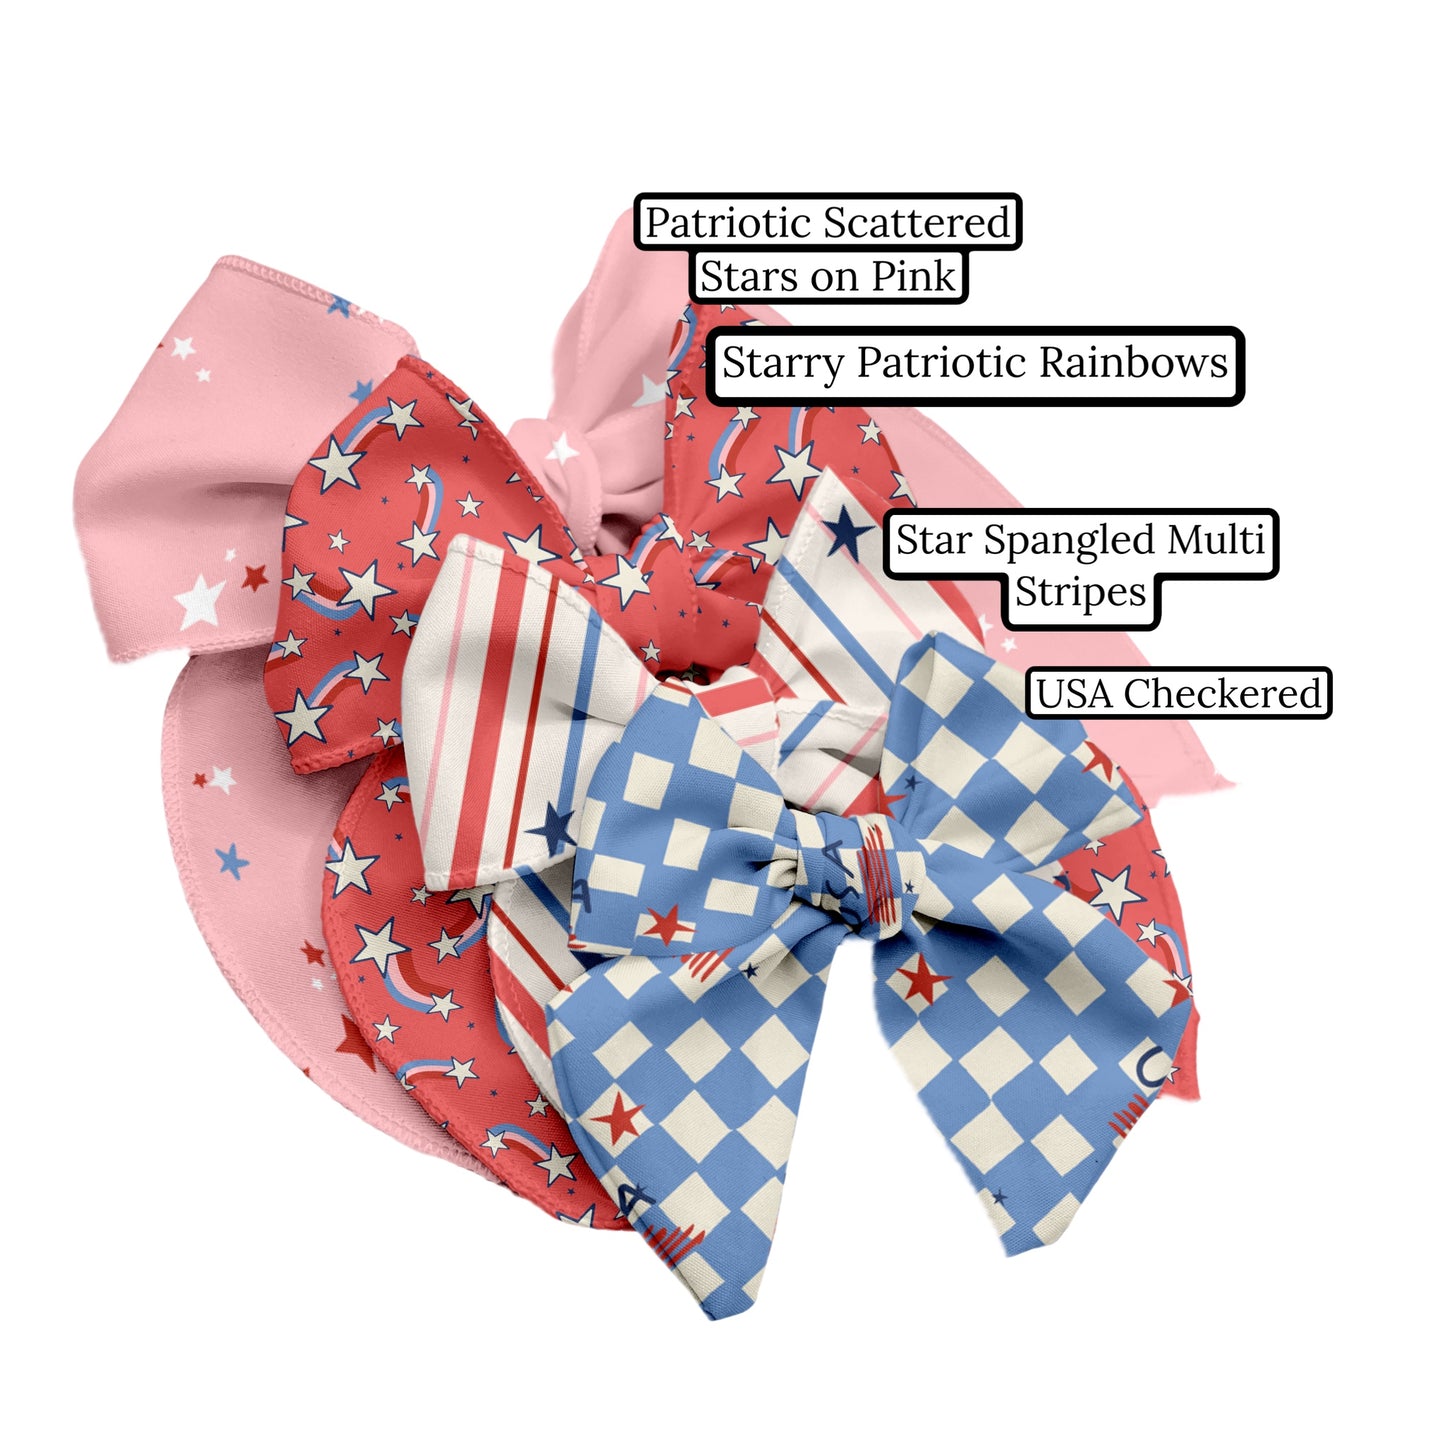 Patriotic Scattered Stars on Pink Hair Bow Strips